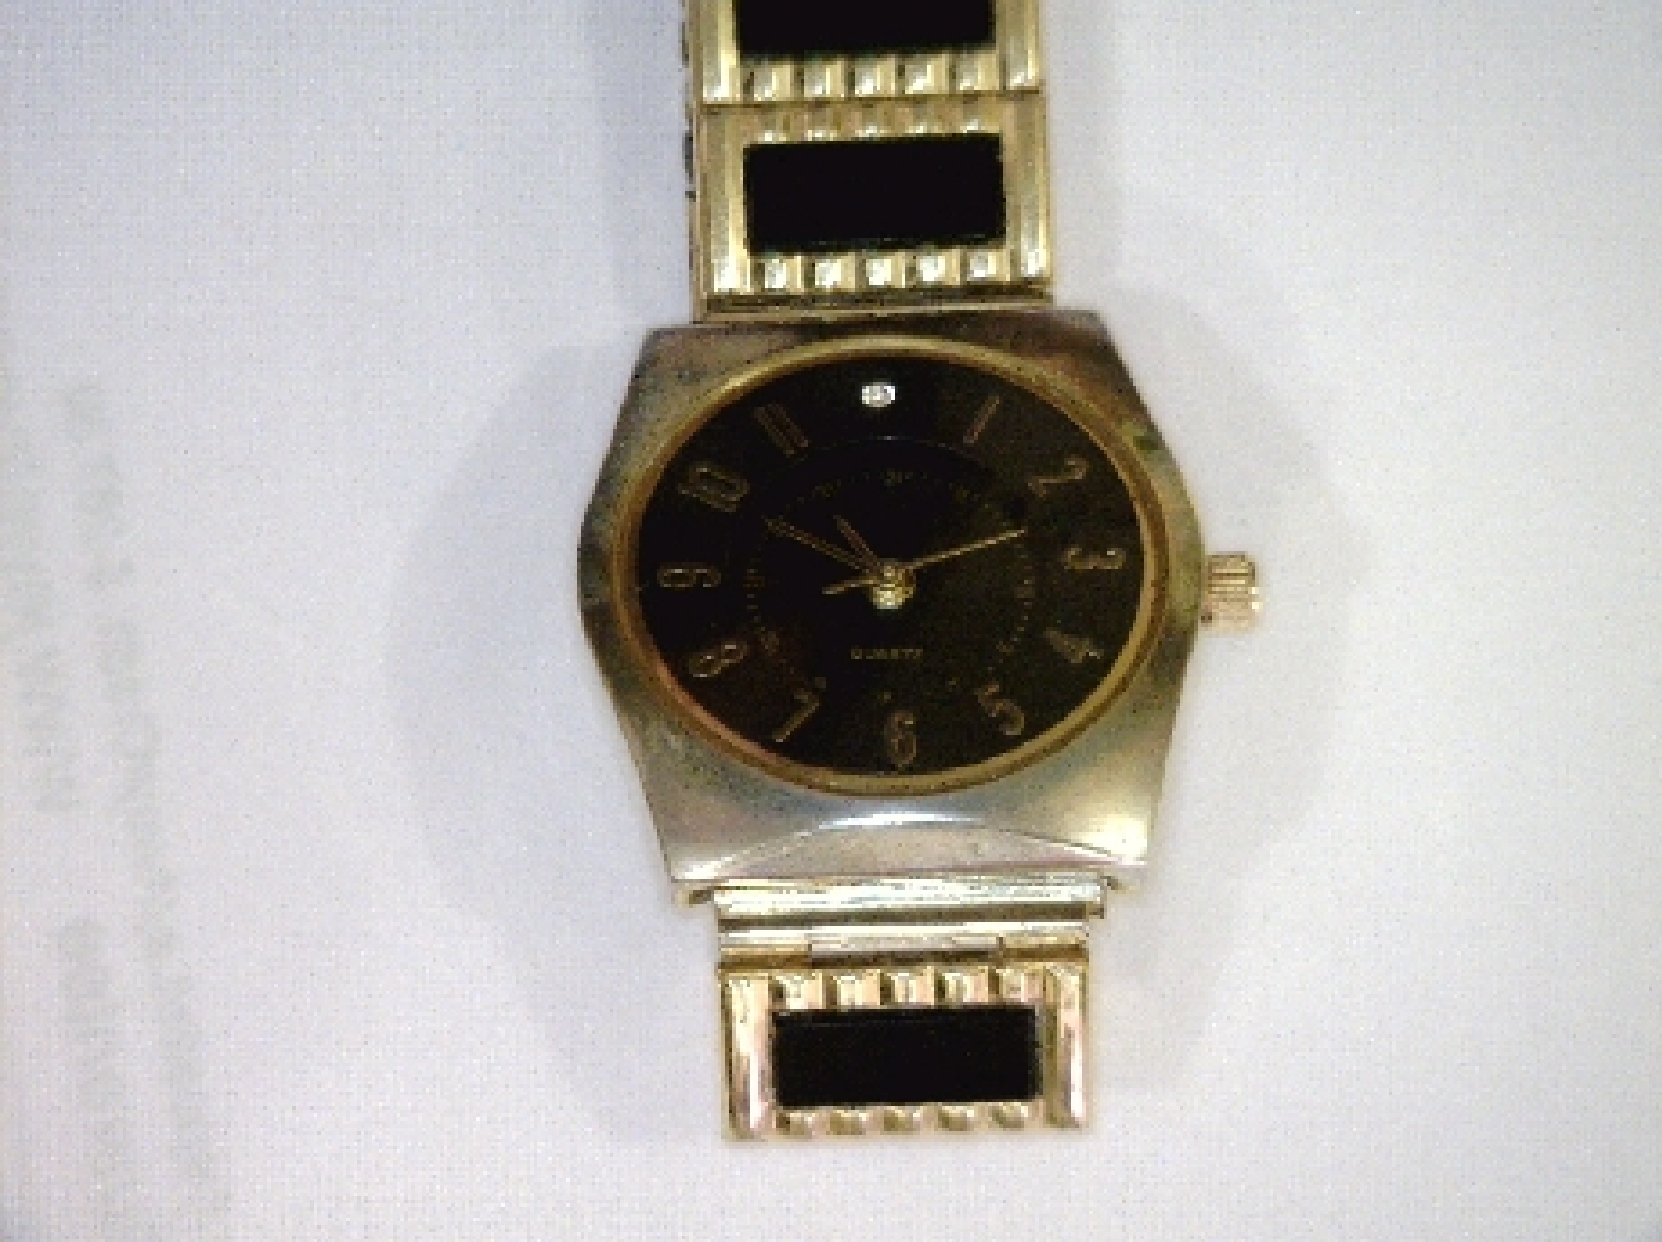 Black and gold Art Deco styled Quartz stretchy band wristwatch.